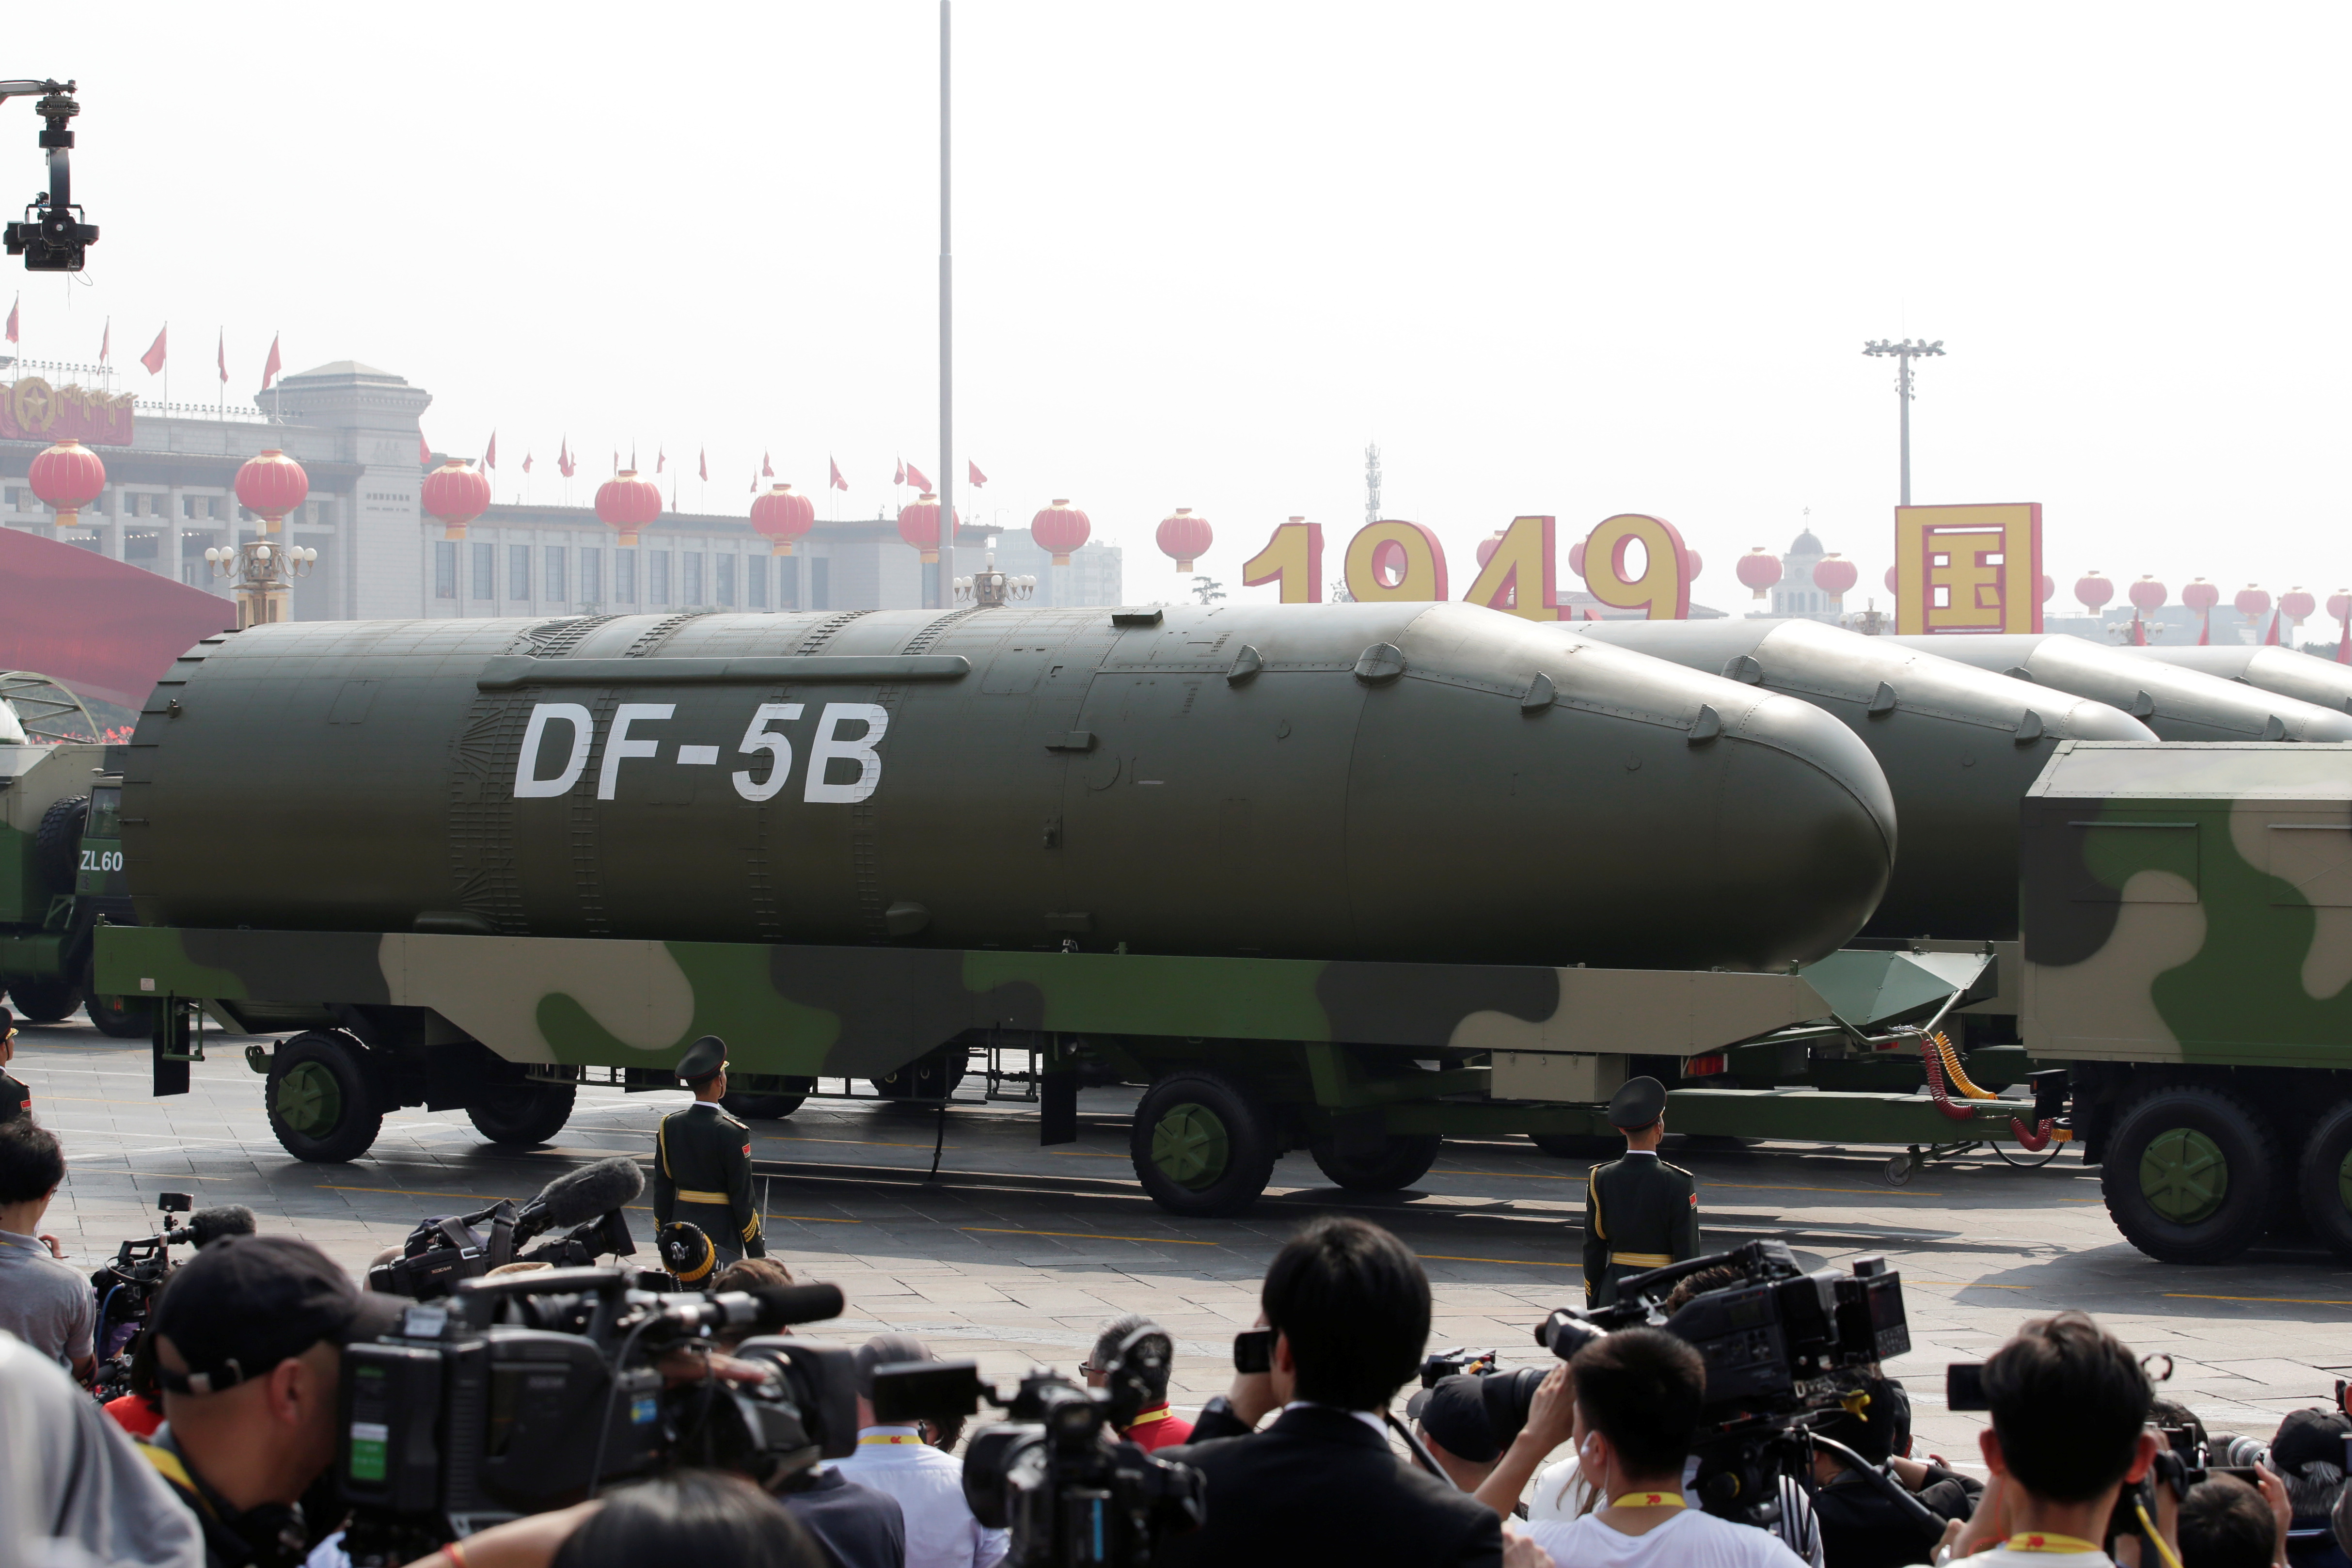 Military vehicles carrying DF-5B intercontinental ballistic missiles travel past Tiananmen Square during the military parade marking the 70th founding anniversary of People's Republic of China